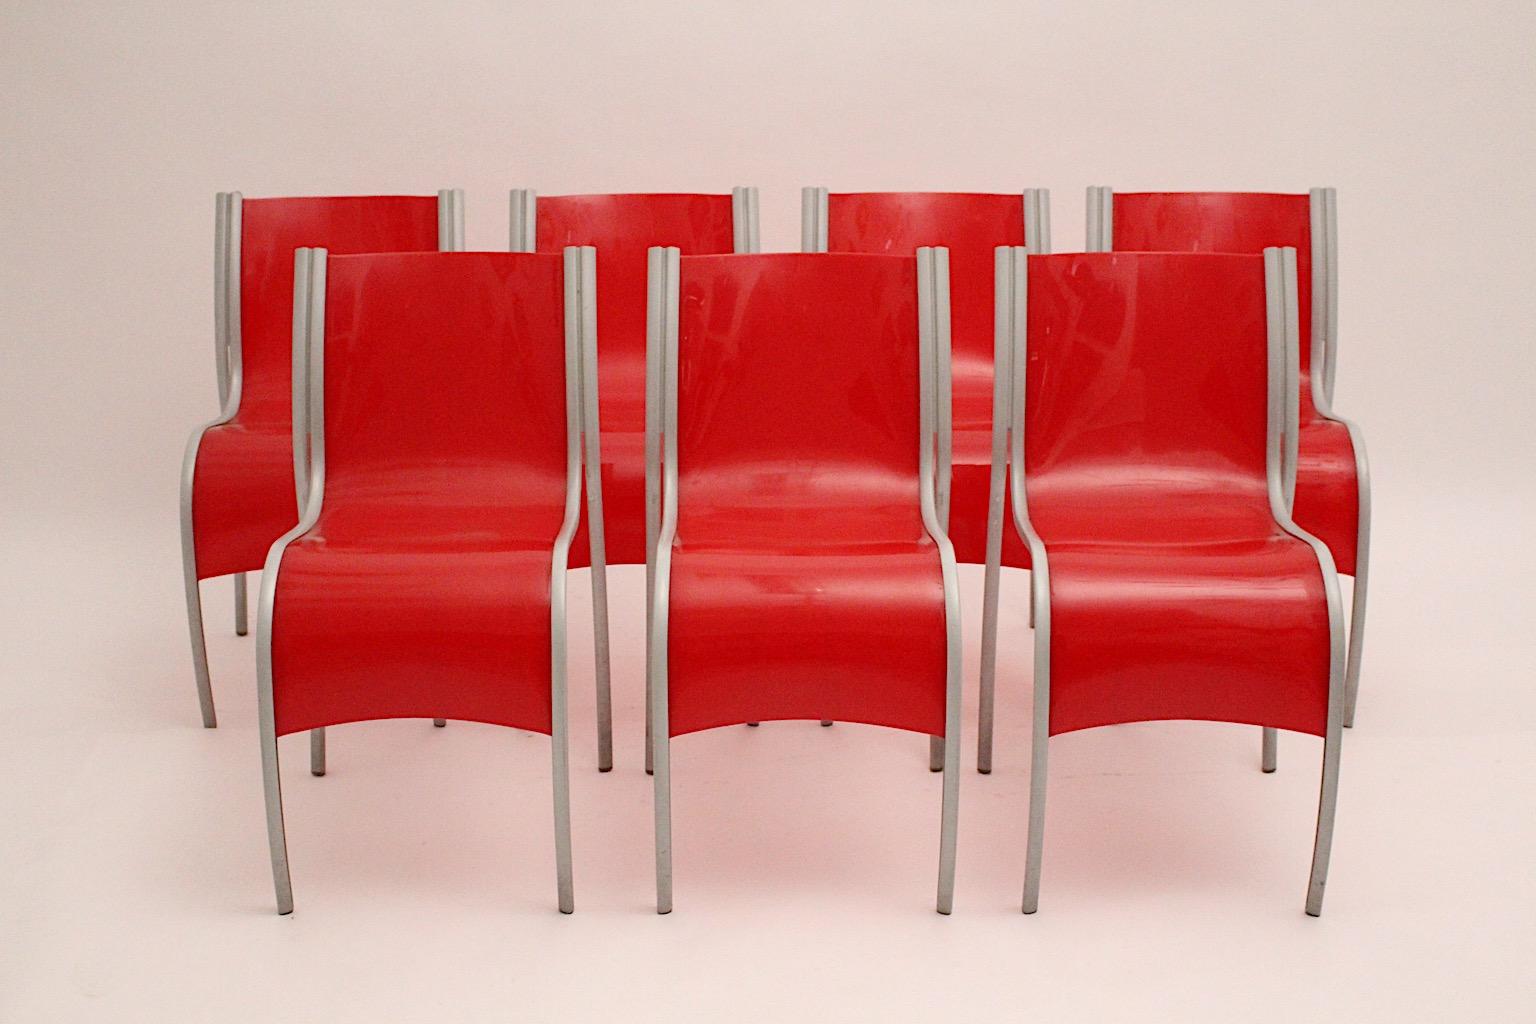 Modern set of 7 red plastic vintage chairs or dining chairs from red plastic and aluminum FPE Fantastic Plastic Elastic by Ron Arad for Kartell Italy 1999.
An amazing set of seven ( 7 ) red curved plastic seat shell chairs with aluminum frame which